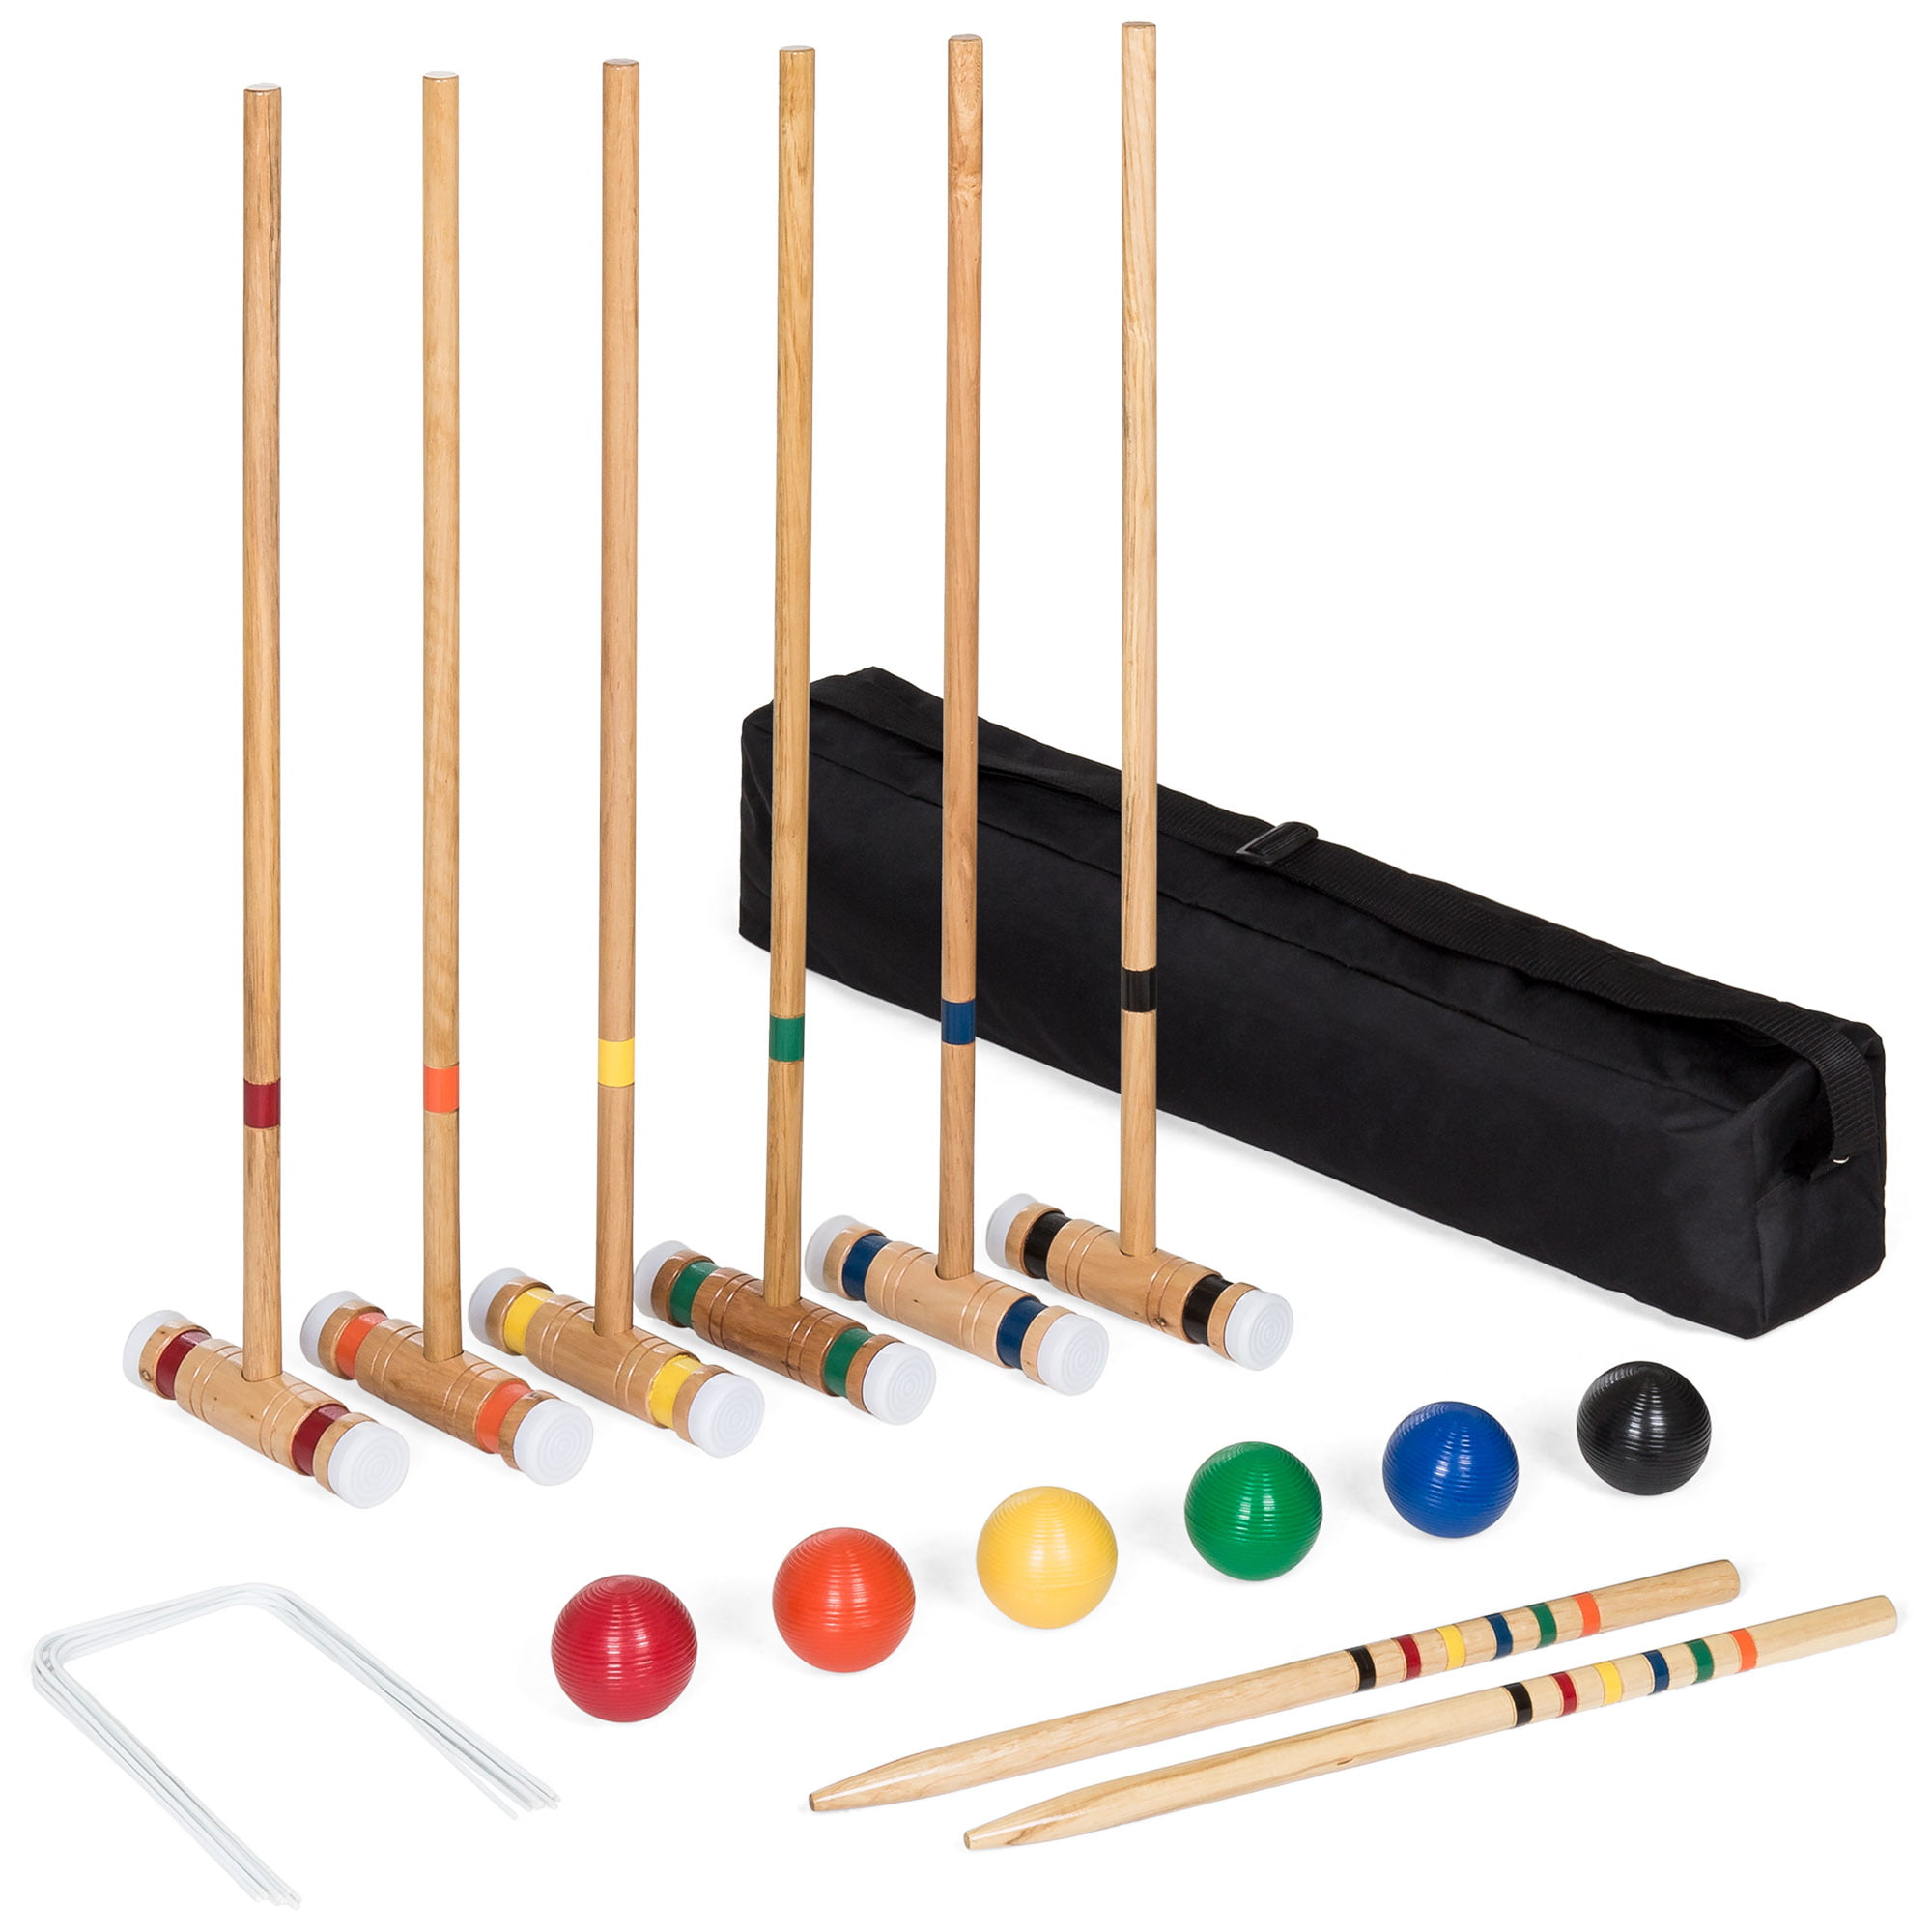 Lawn Backyard Game Set for Adults//Kids//Family ApudArmis Six Player Croquet Set with Premiun Pine Wooden Mallets,Colored Ball,Wickets,Stakes Large Carry Bag Including